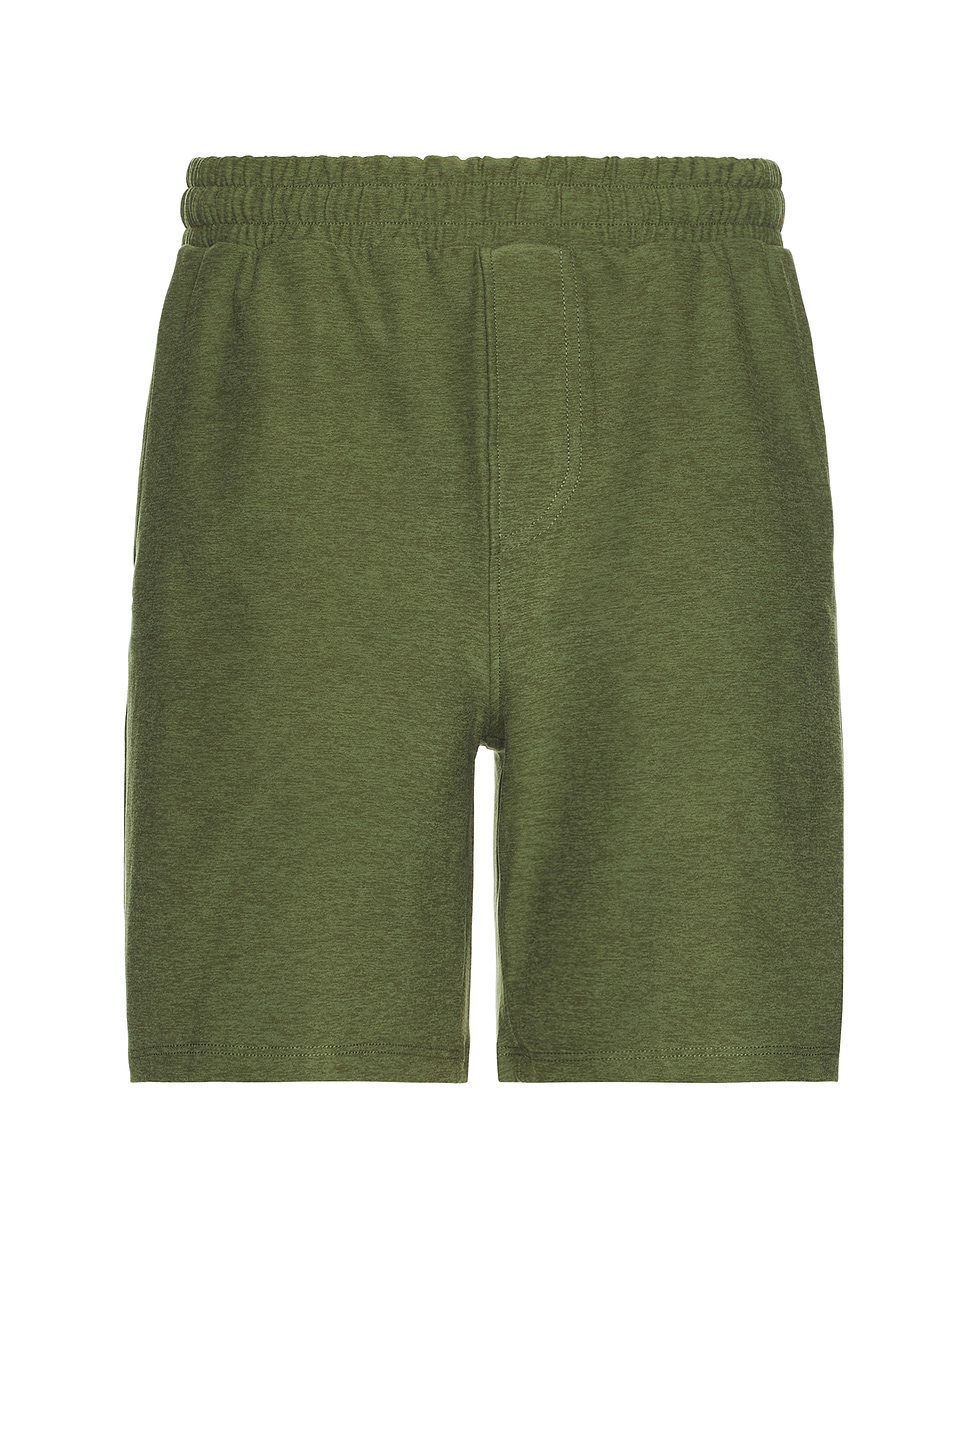 Image 1 of Beyond Yoga Take It Easy Short in Moss Green Heather